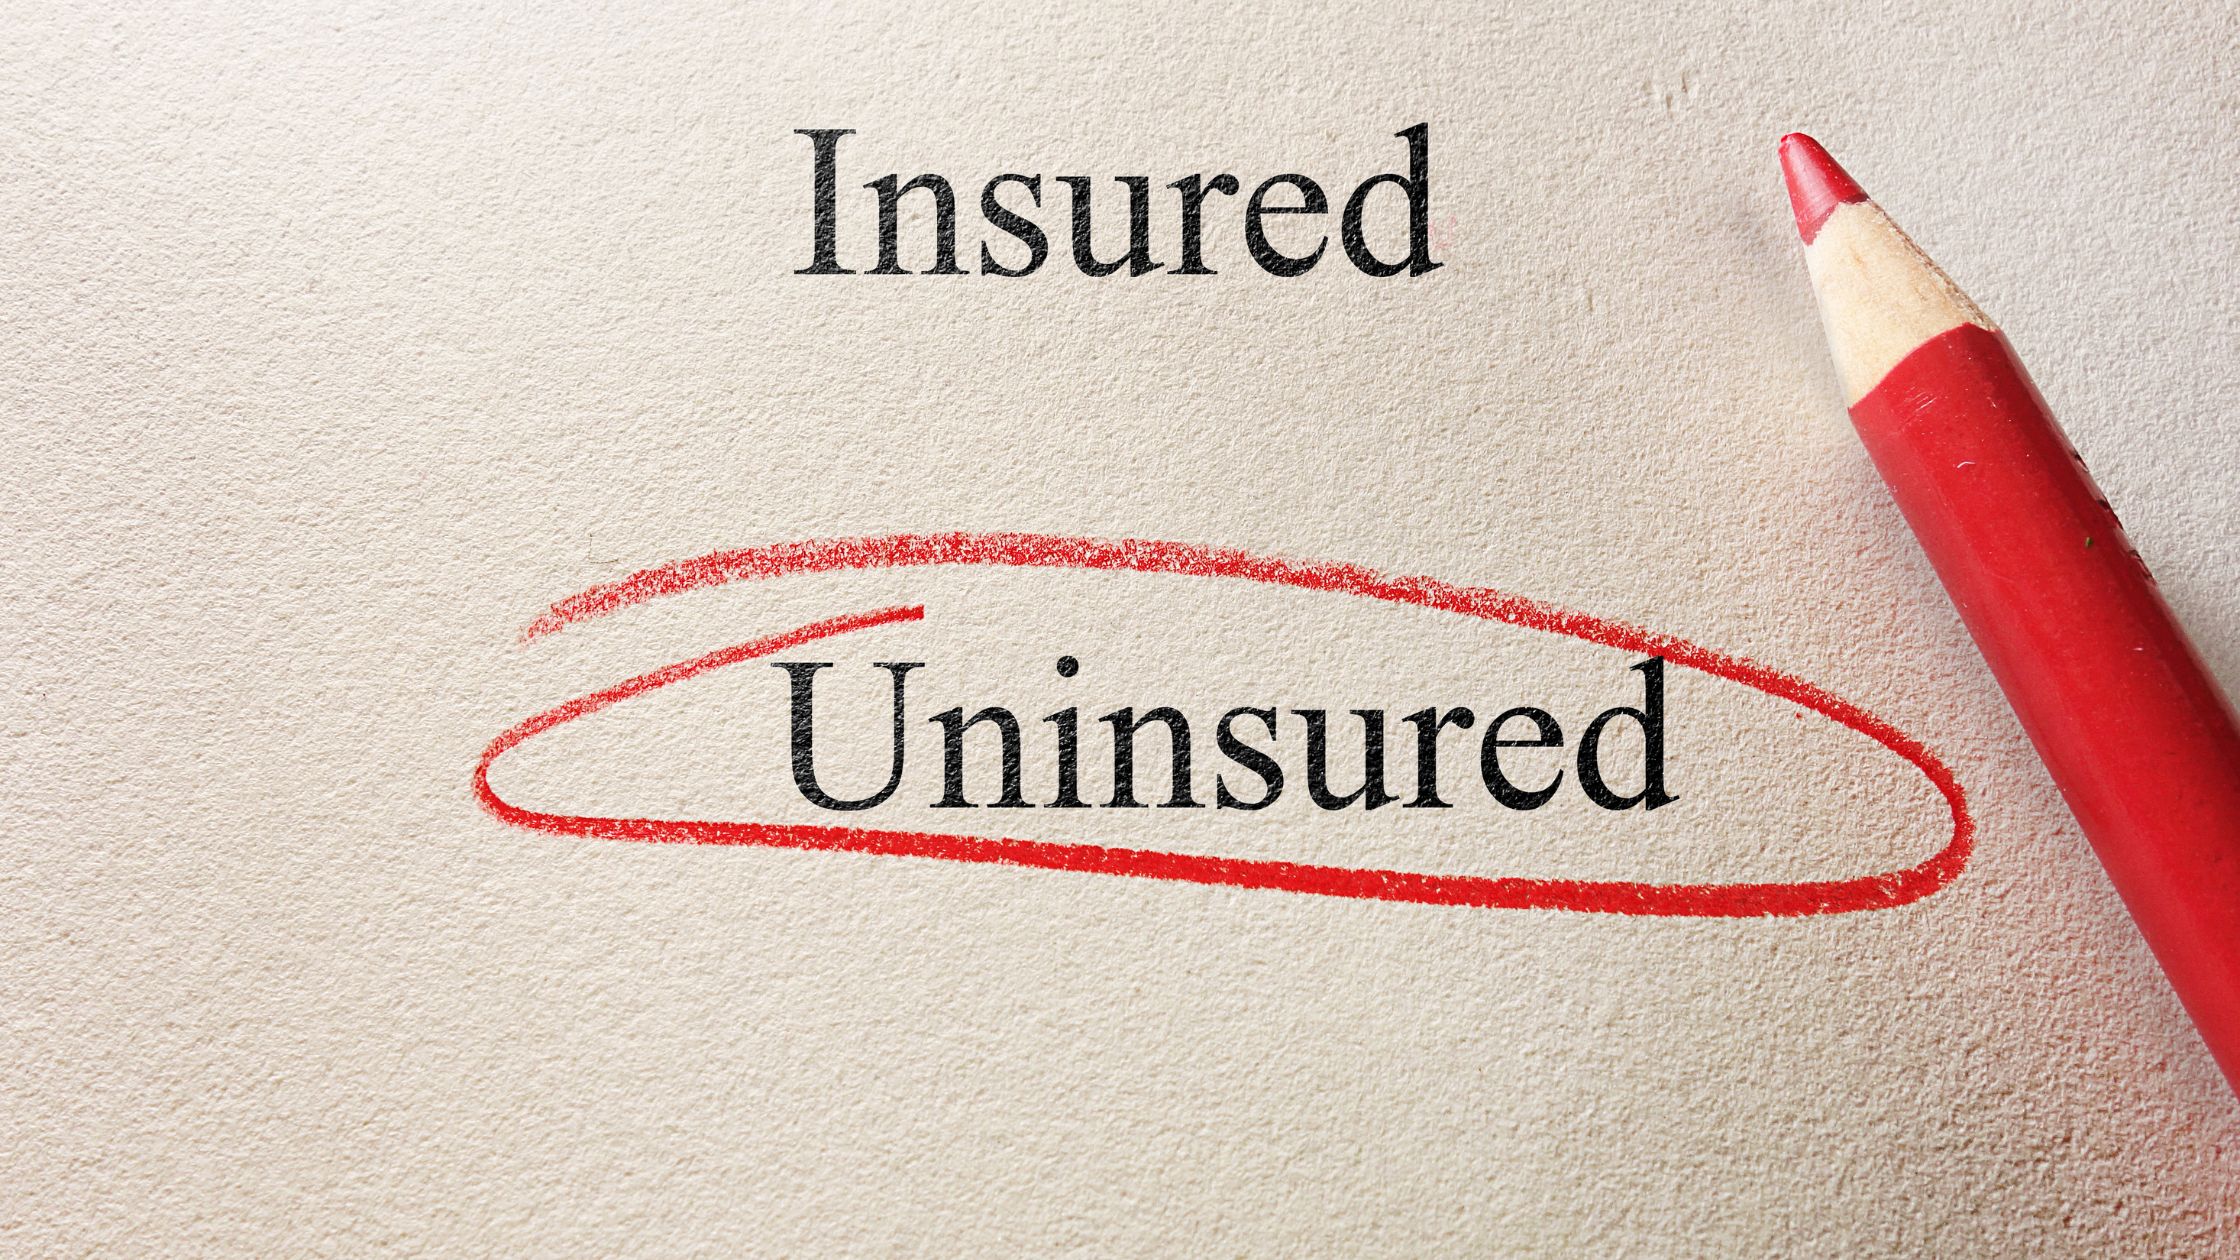 The word 'Uninsured' is circled in red pencil on a paper, emphasizing the query about the consequences of driving without insurance.